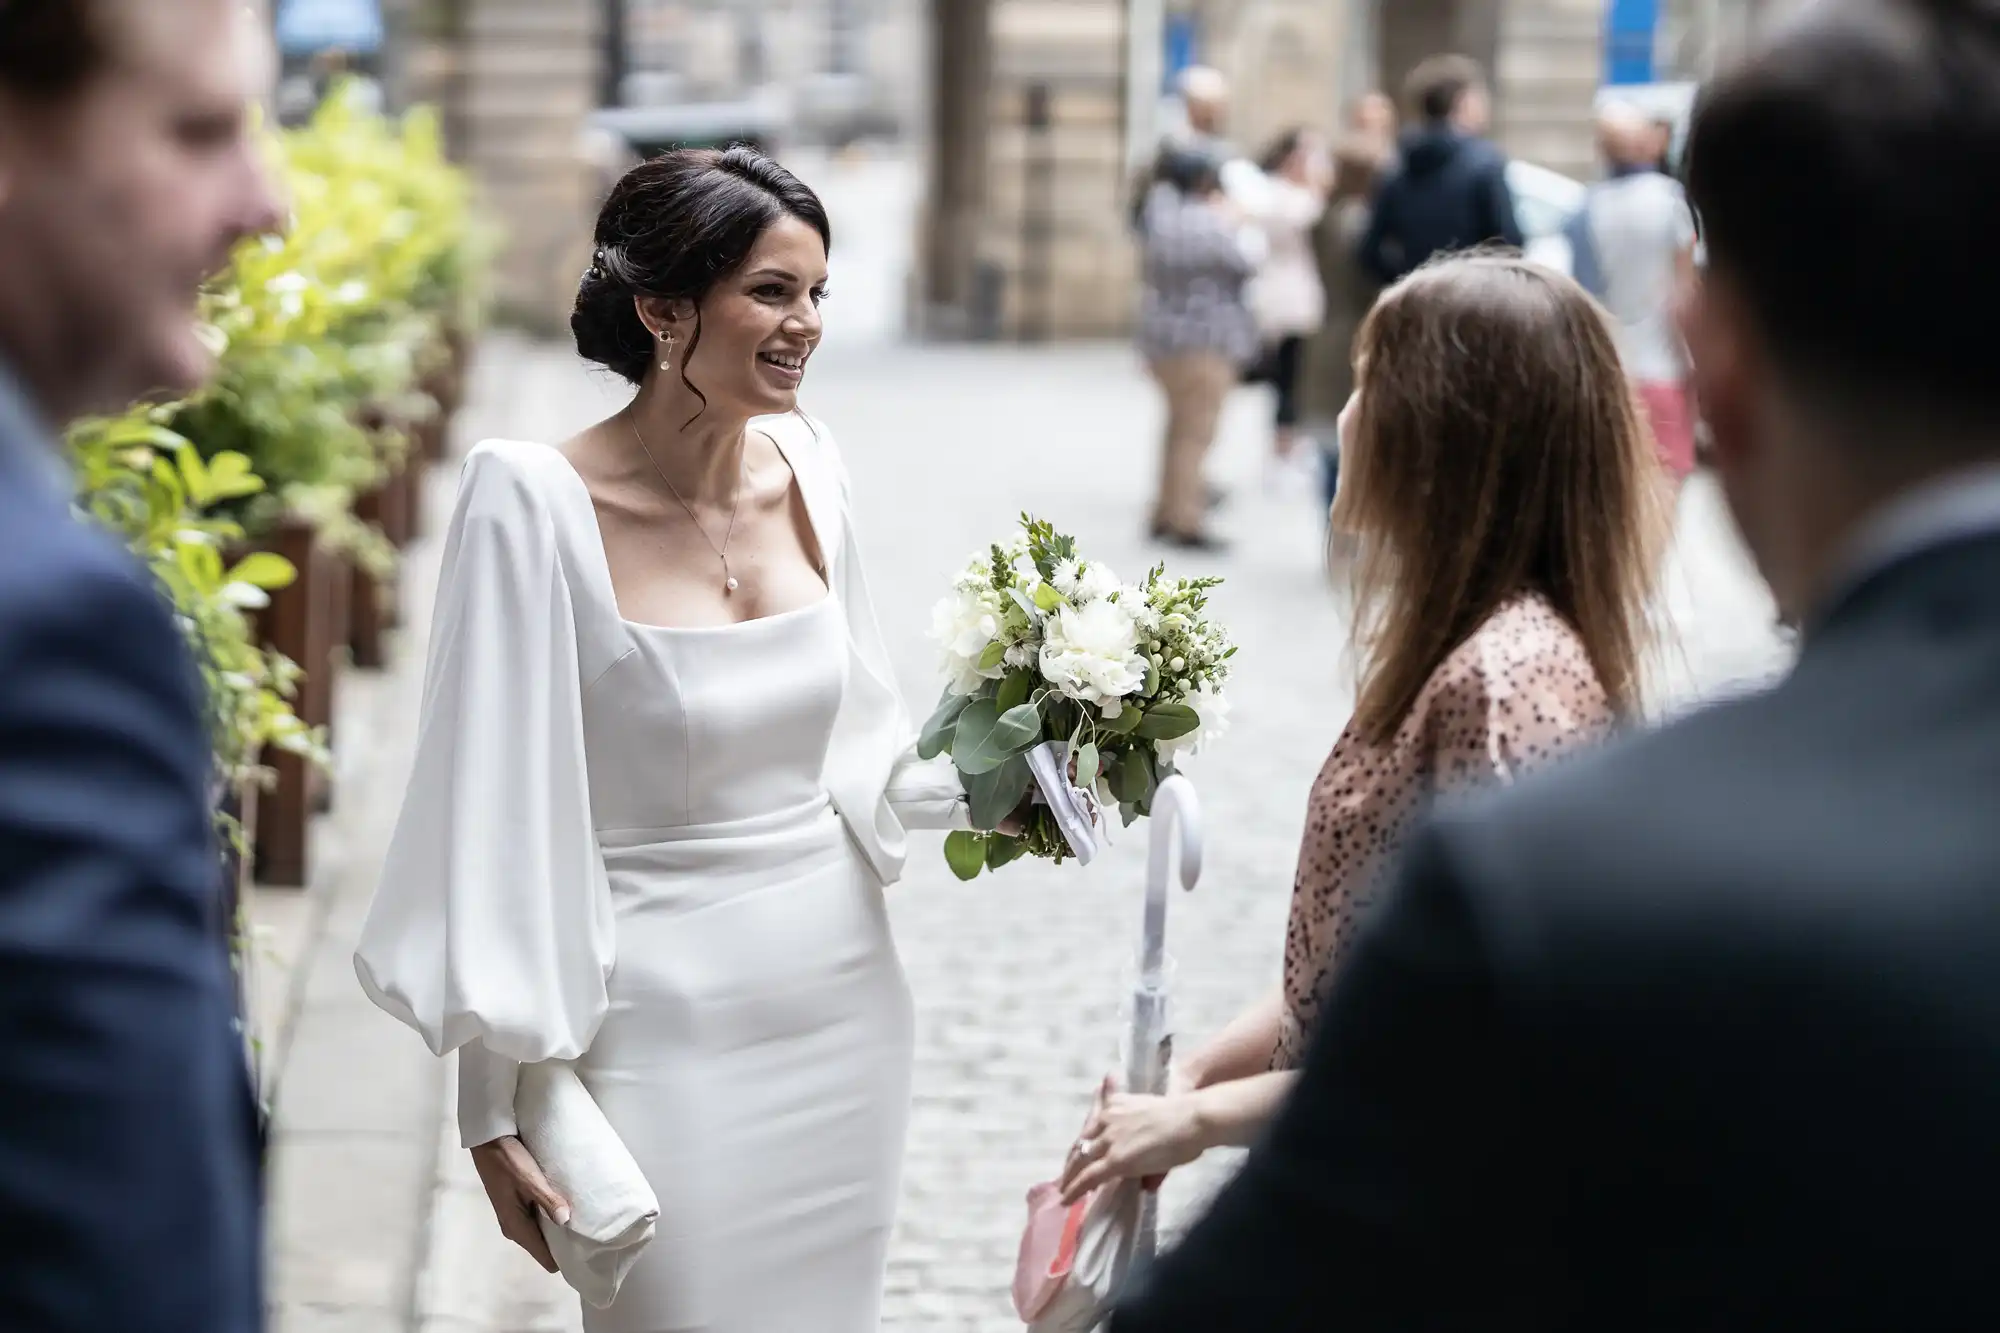 A bride with a bouquet, smiling as she walks through a crowd in a city setting, wearing a white dress with a cape.